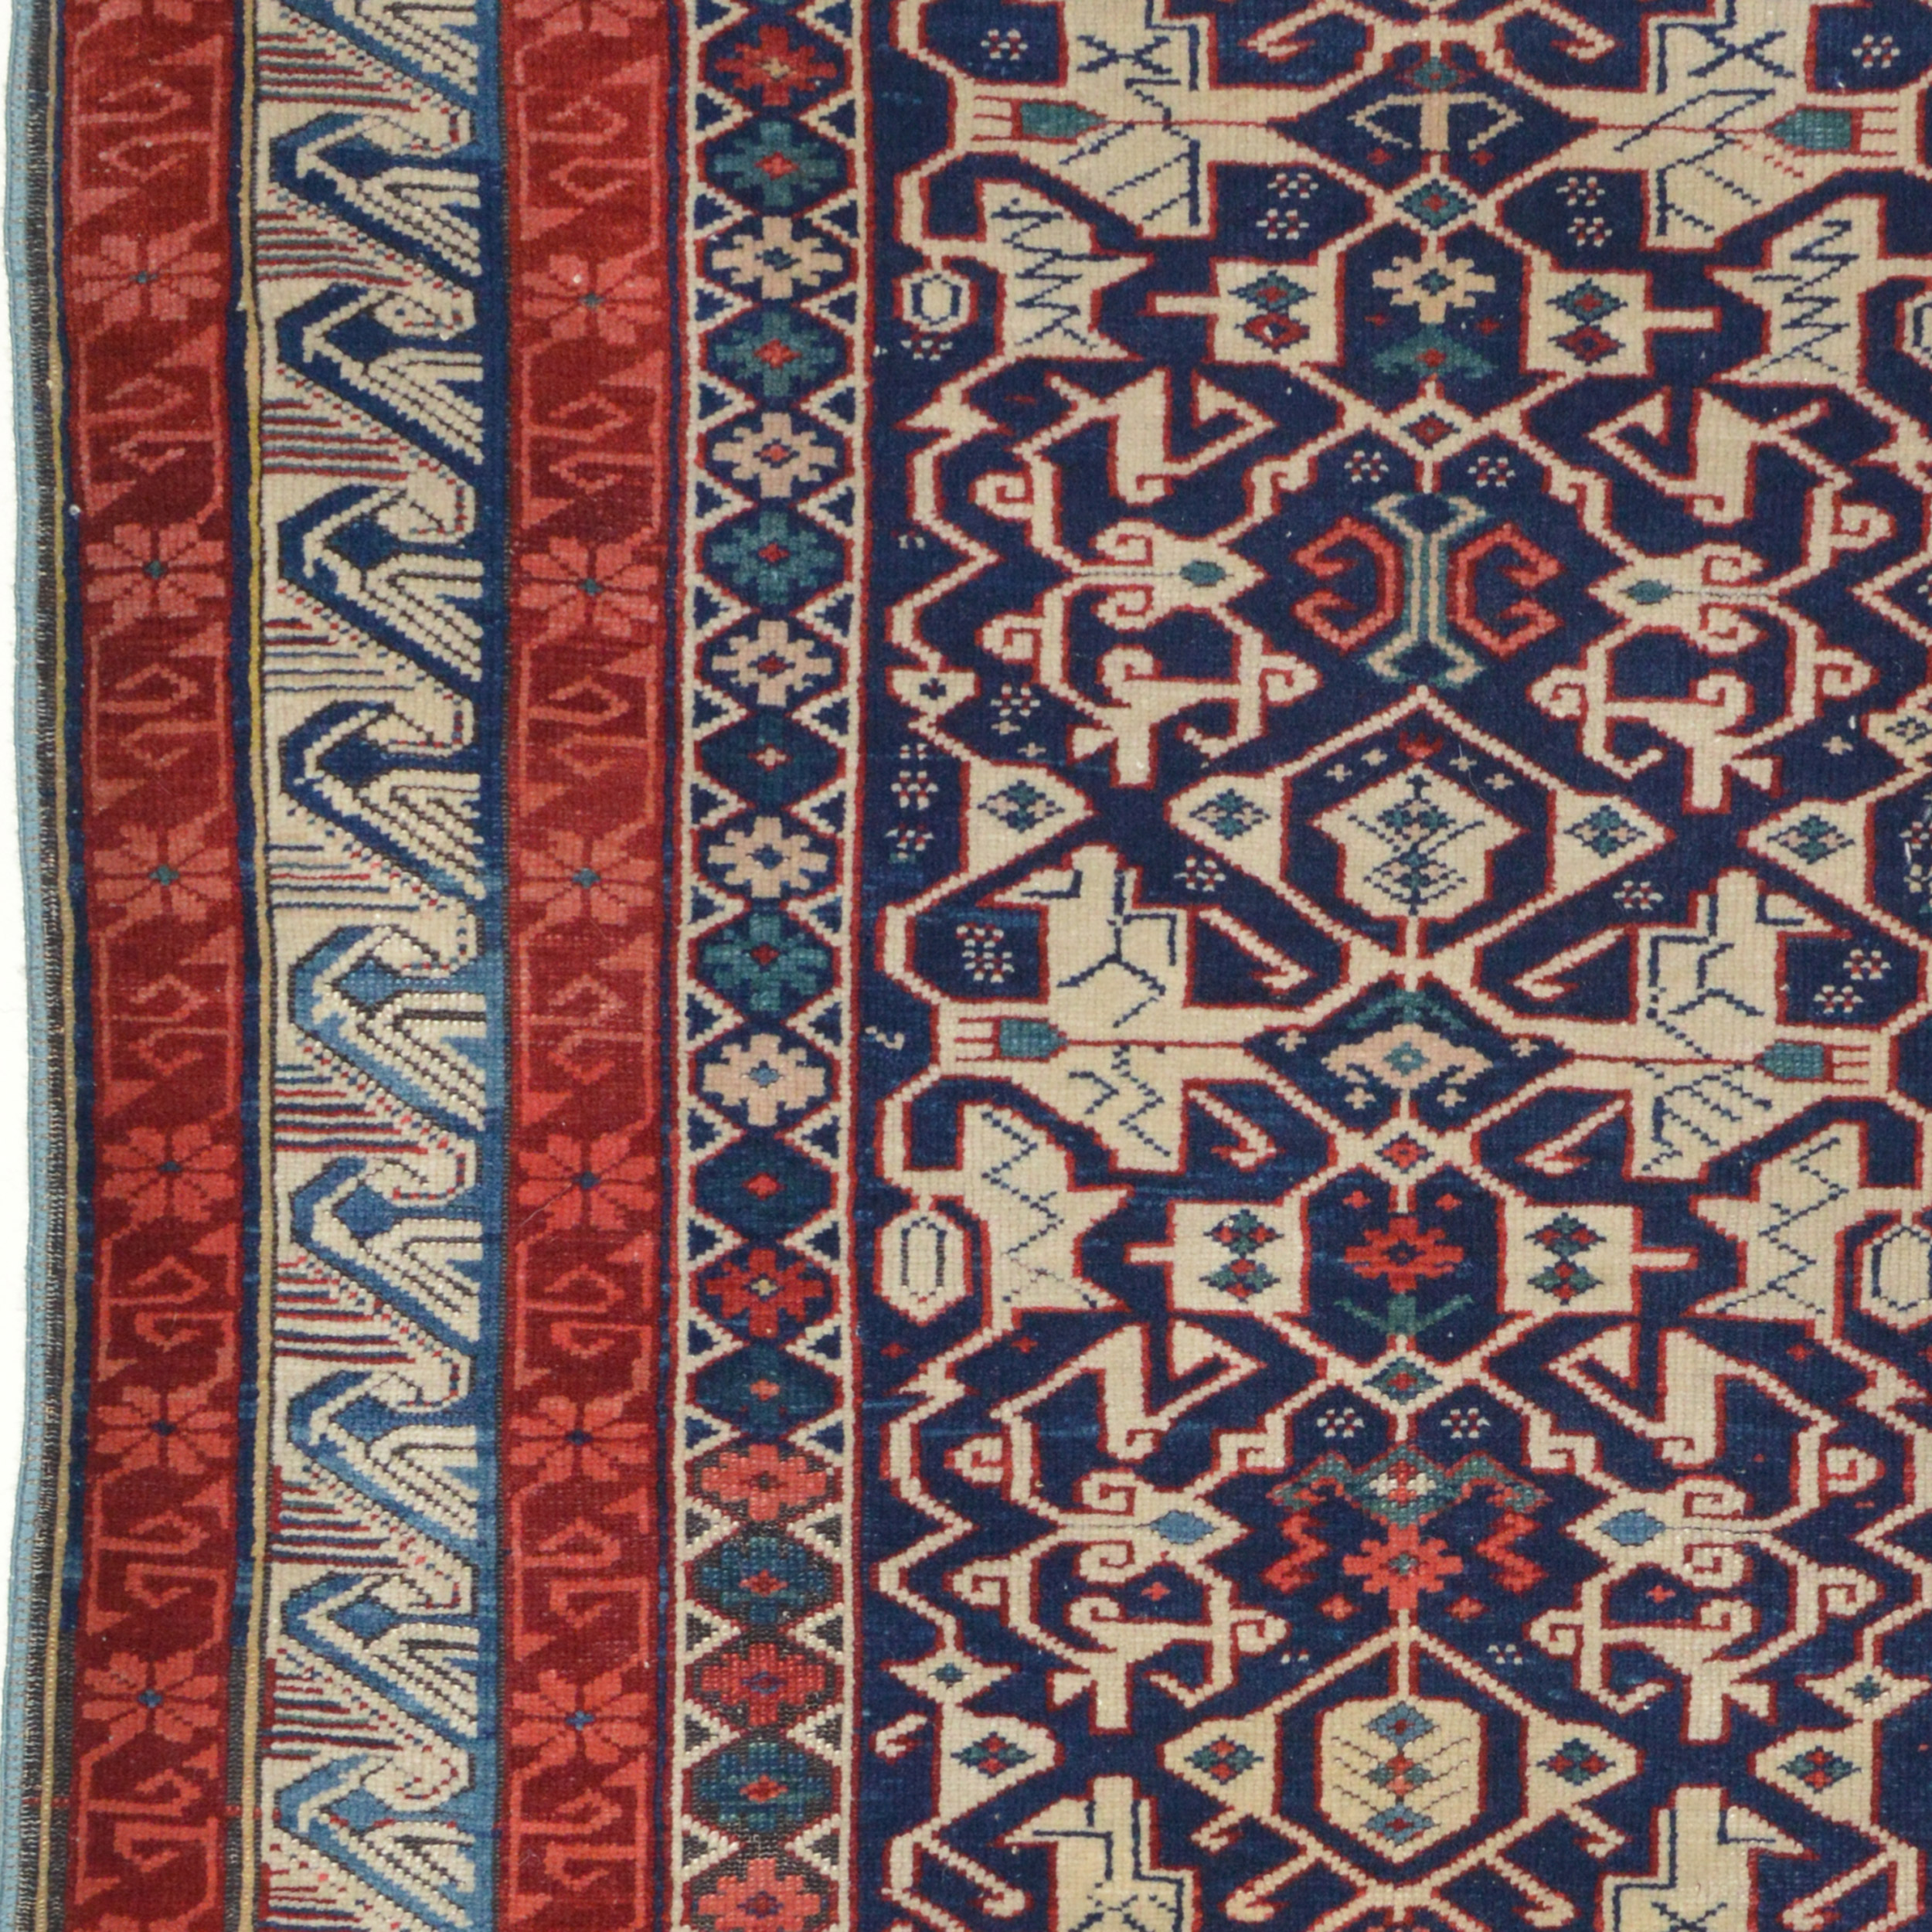 Detail of a Konagend style field design and Seychour border system in an antique northeast Caucasian Kuba rug. Douglas Stock Gallery is one of America's most respected dealers in antique Oriental rugs. Antique rugs Boston,MA area, antique rugs New York by appointment, antique rugs Washington,DC by appointment. Antique Caucasian rugs Boston,MA area